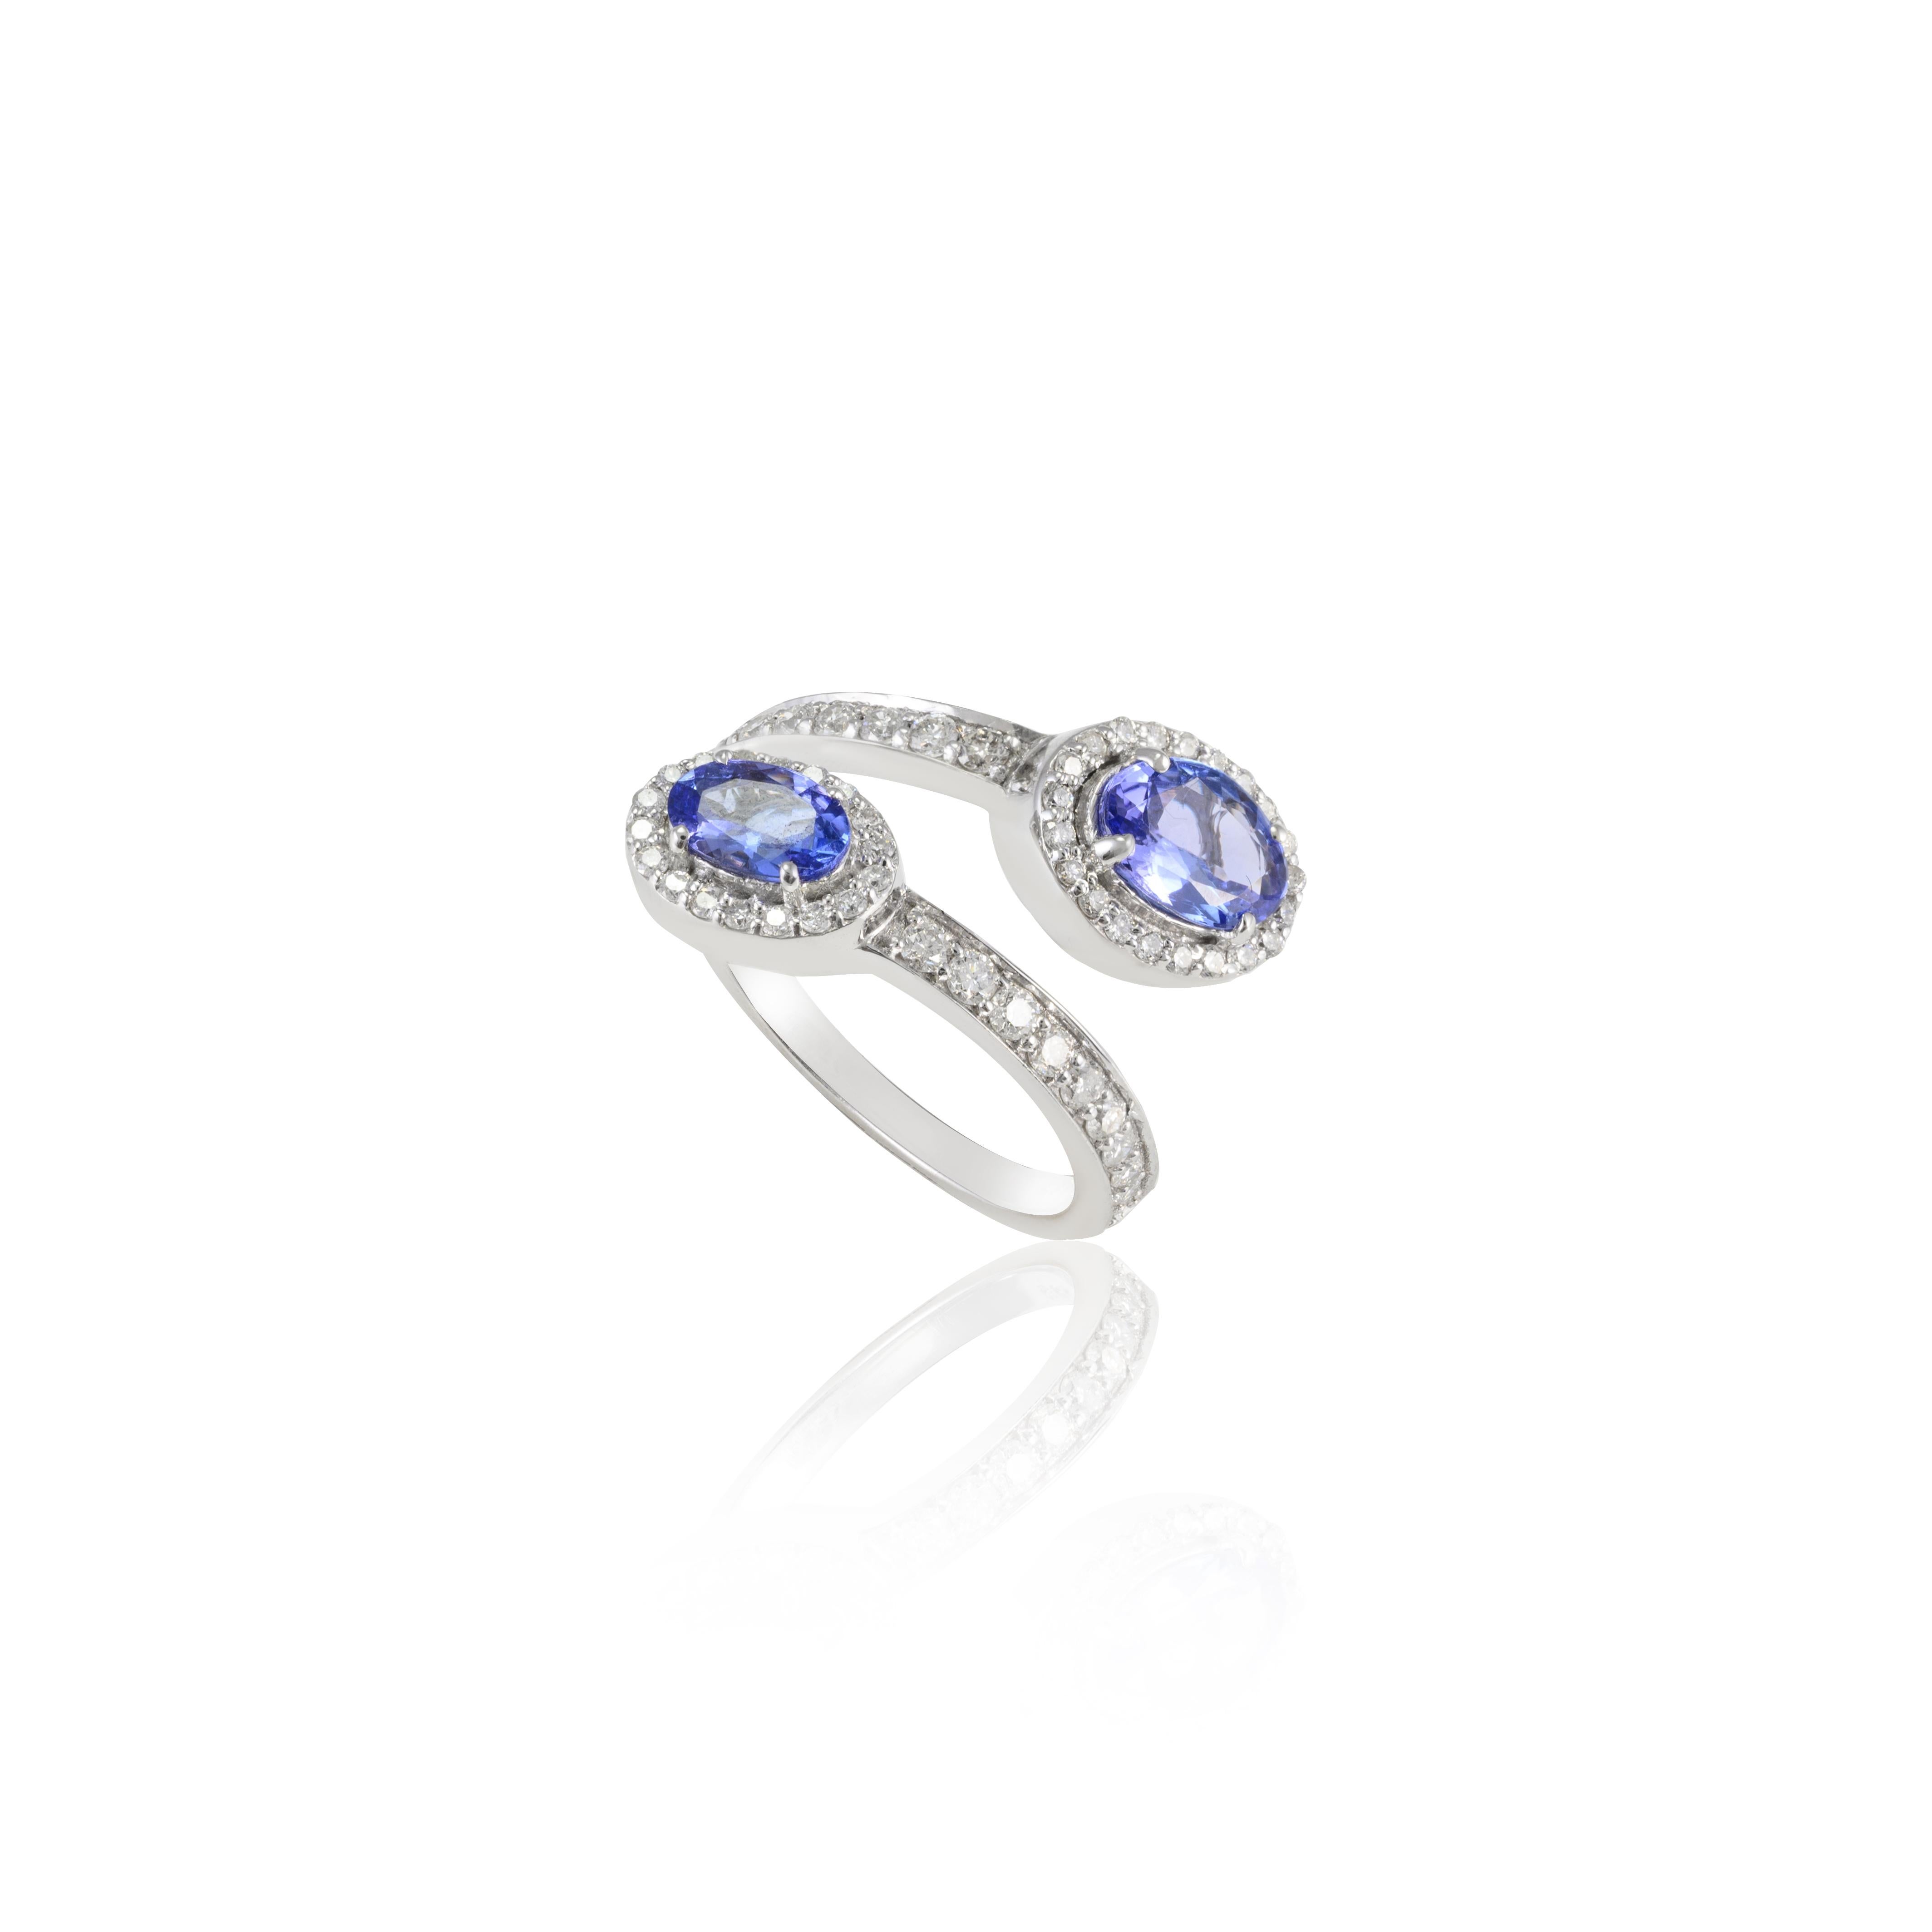 For Sale:  14k White Gold 1.04ct Genuine Oval Tanzanite and Halo Diamond Bypass Ring 2